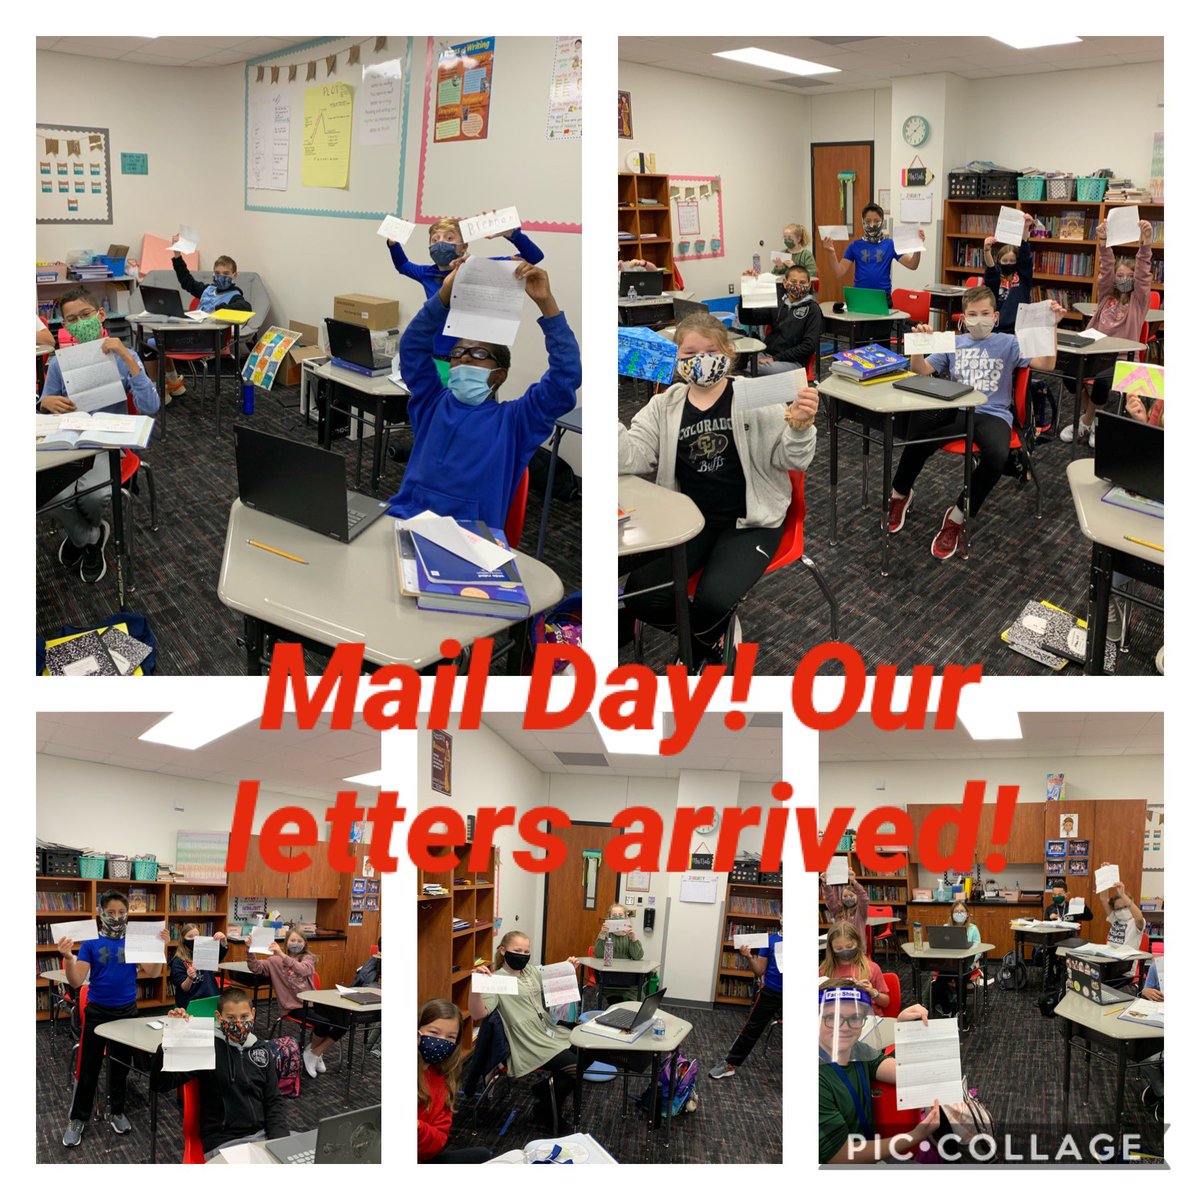 We finished our unit over letter writing before the break, and today mail was delivered!!#theartofletterwriting @PrestonElem18